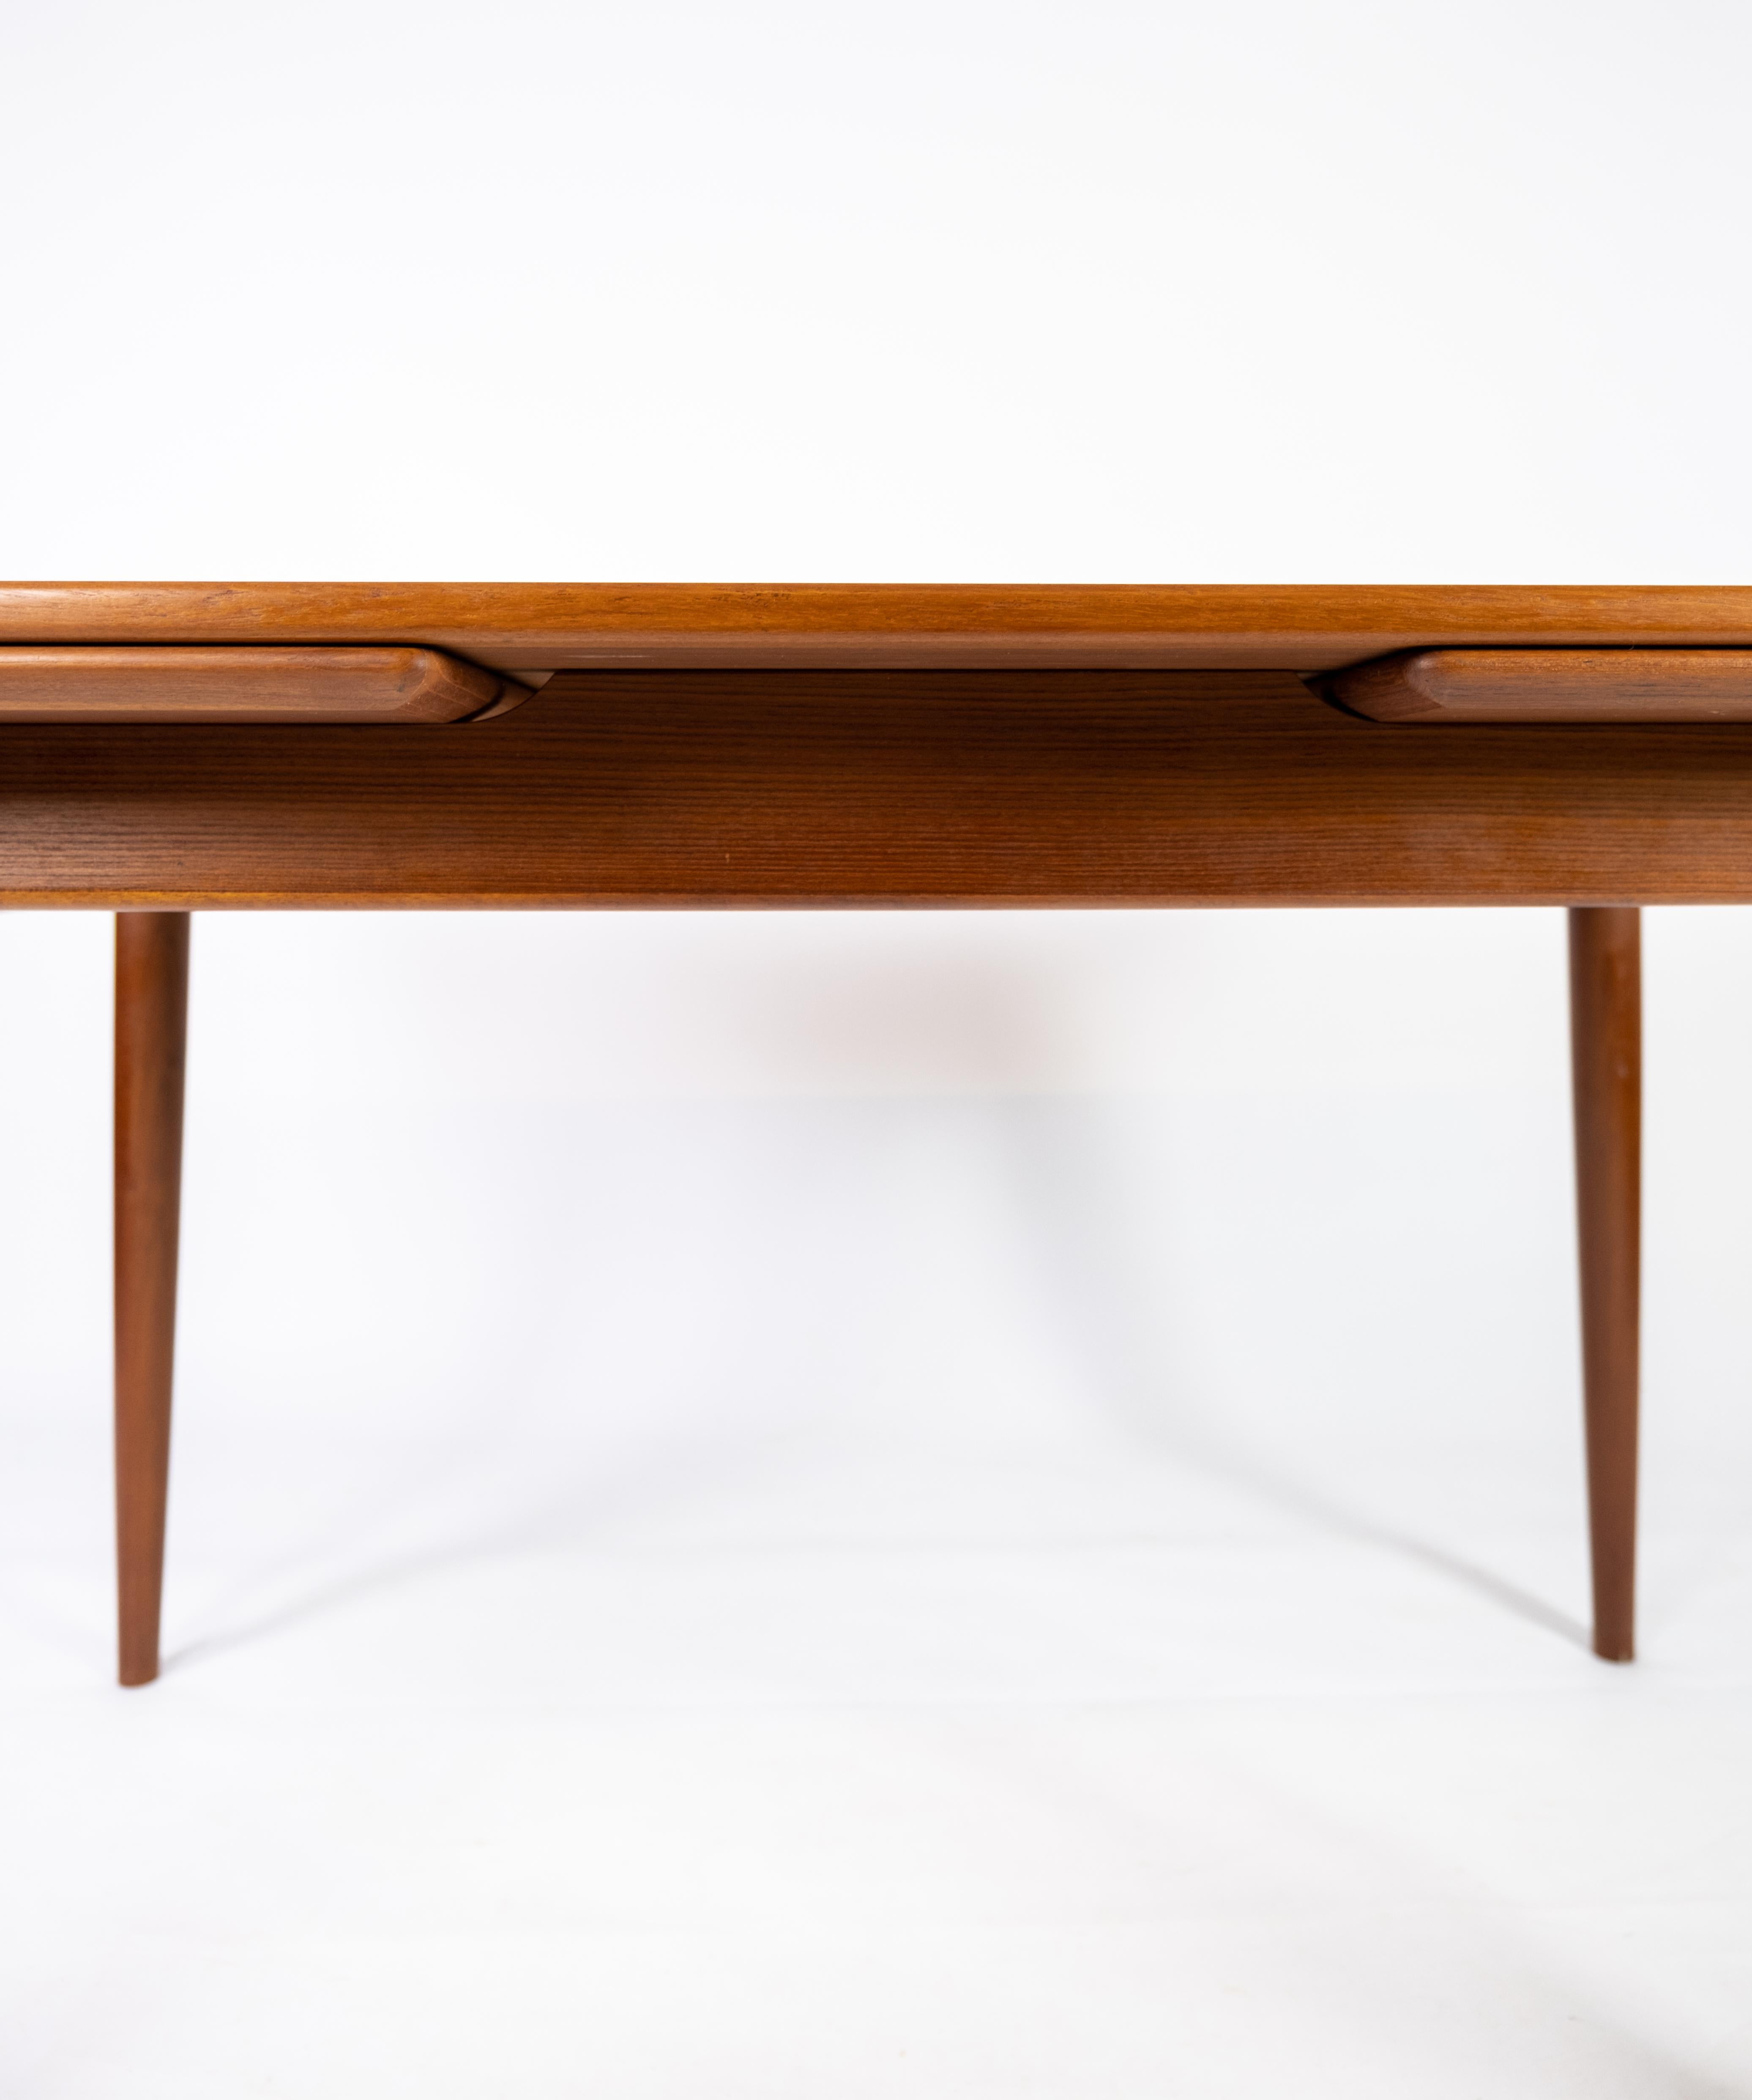 Dining Table Made In Teak With Extentions, Danish Design From 1960s For Sale 4